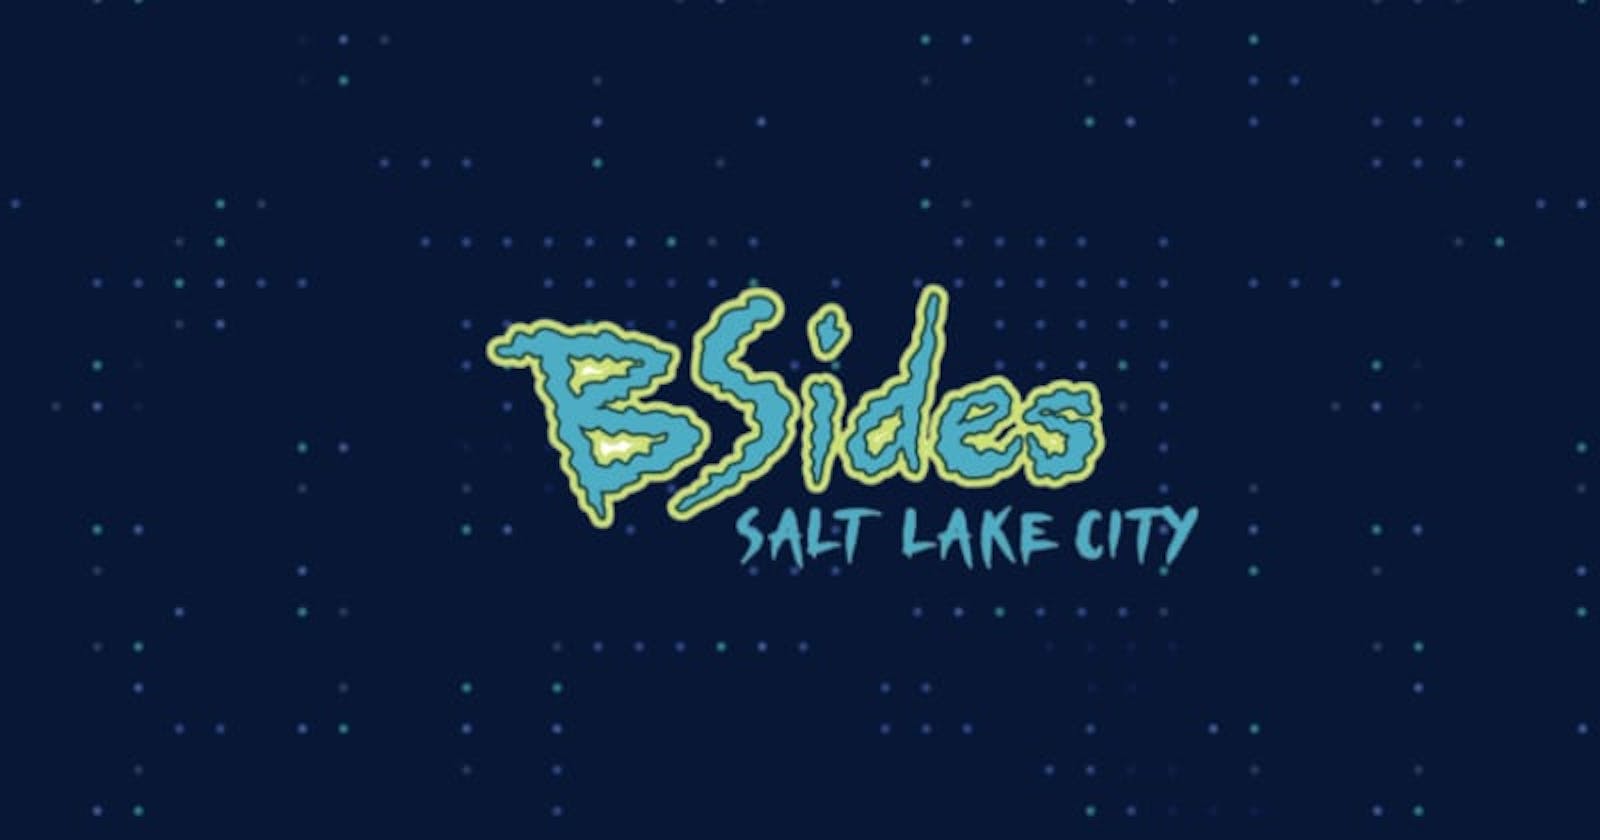 BSides SLC: Community, Fun, And Security Best Practices In Salt Lake City